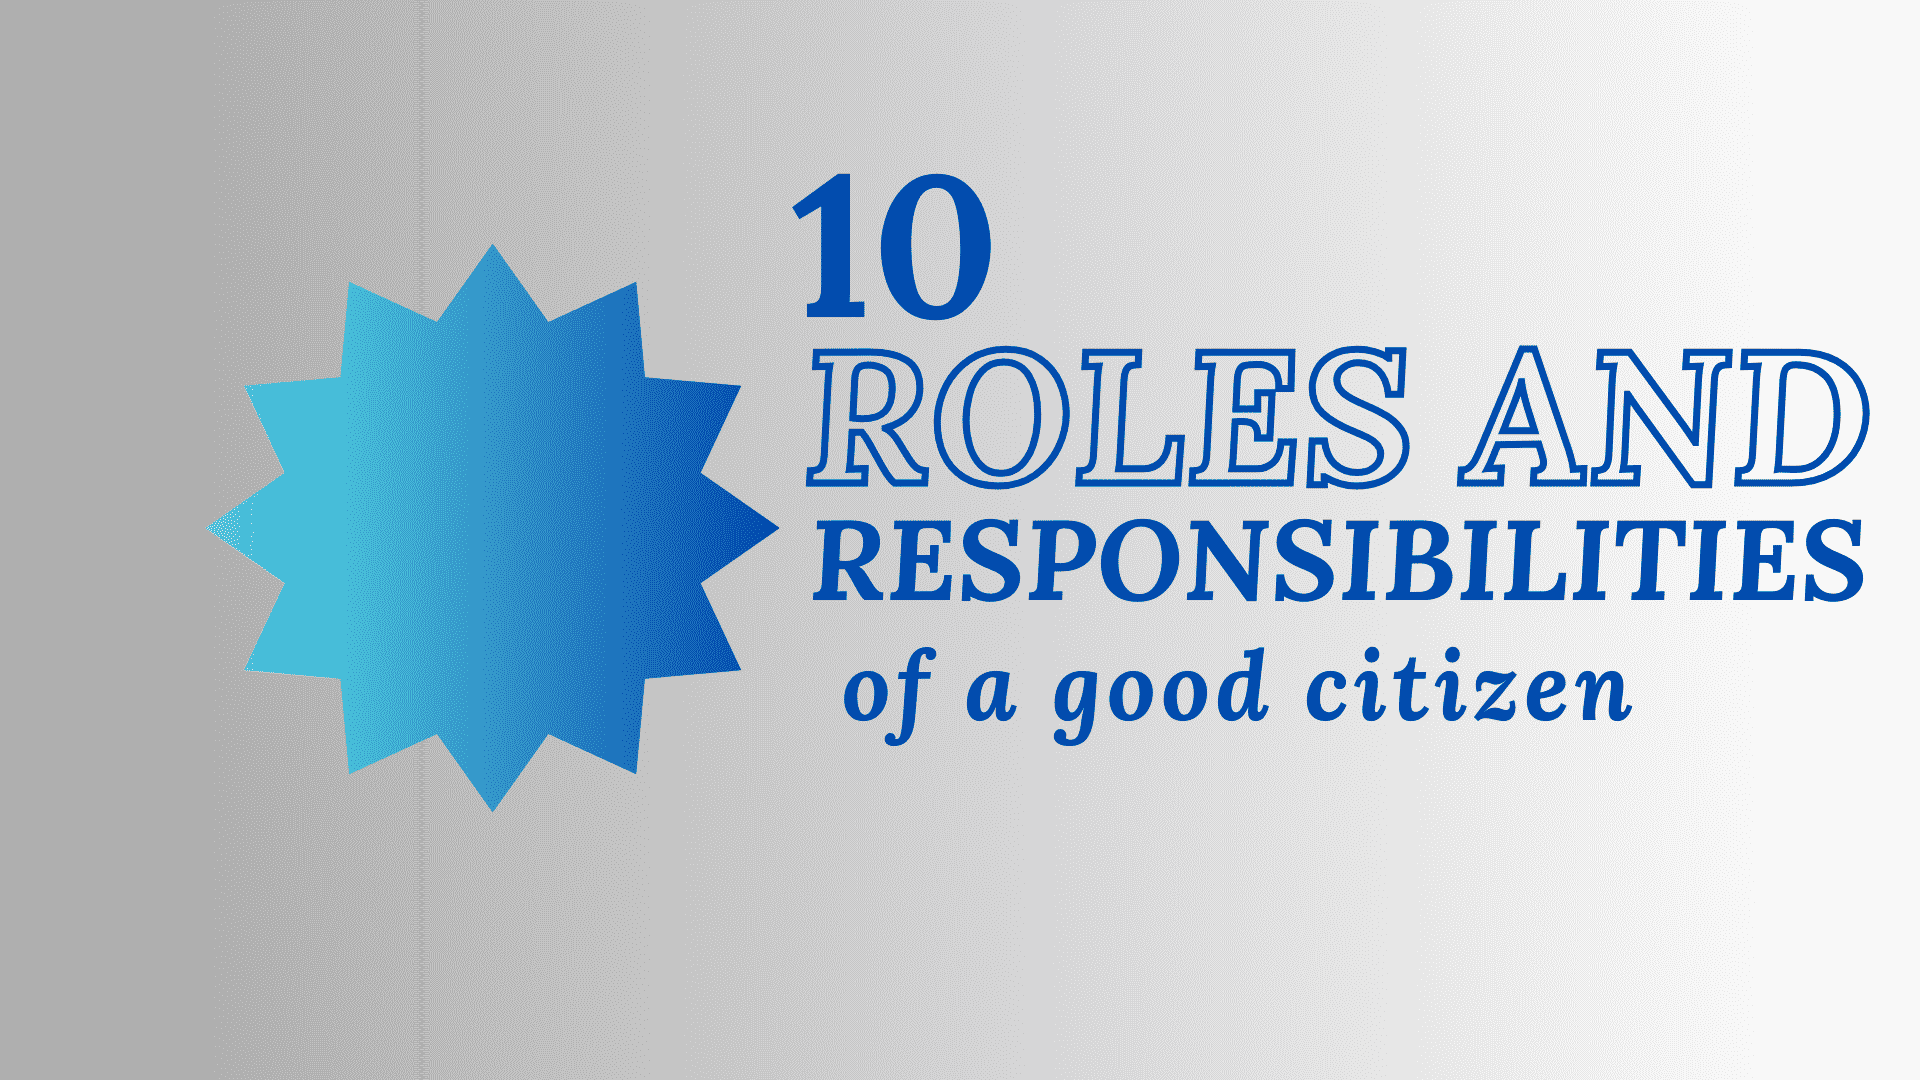 10 Roles and responsibilities of a good citizen